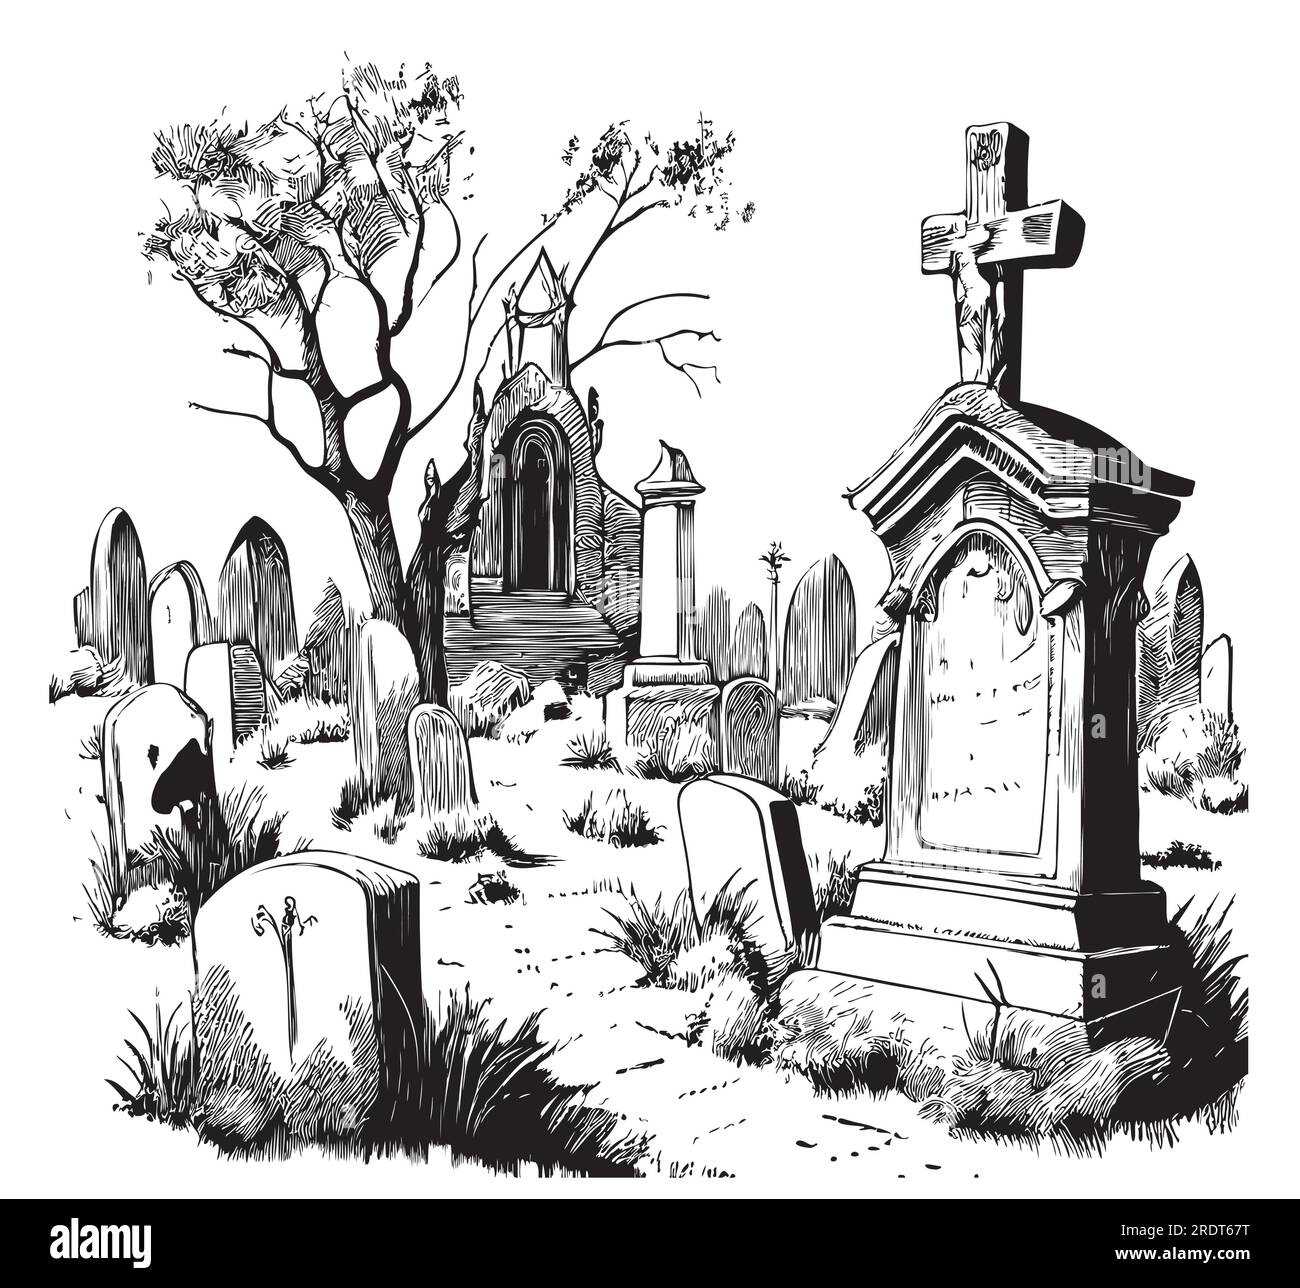 Ancient old cemetery hand drawn sketch Vector illustration Stock Vector